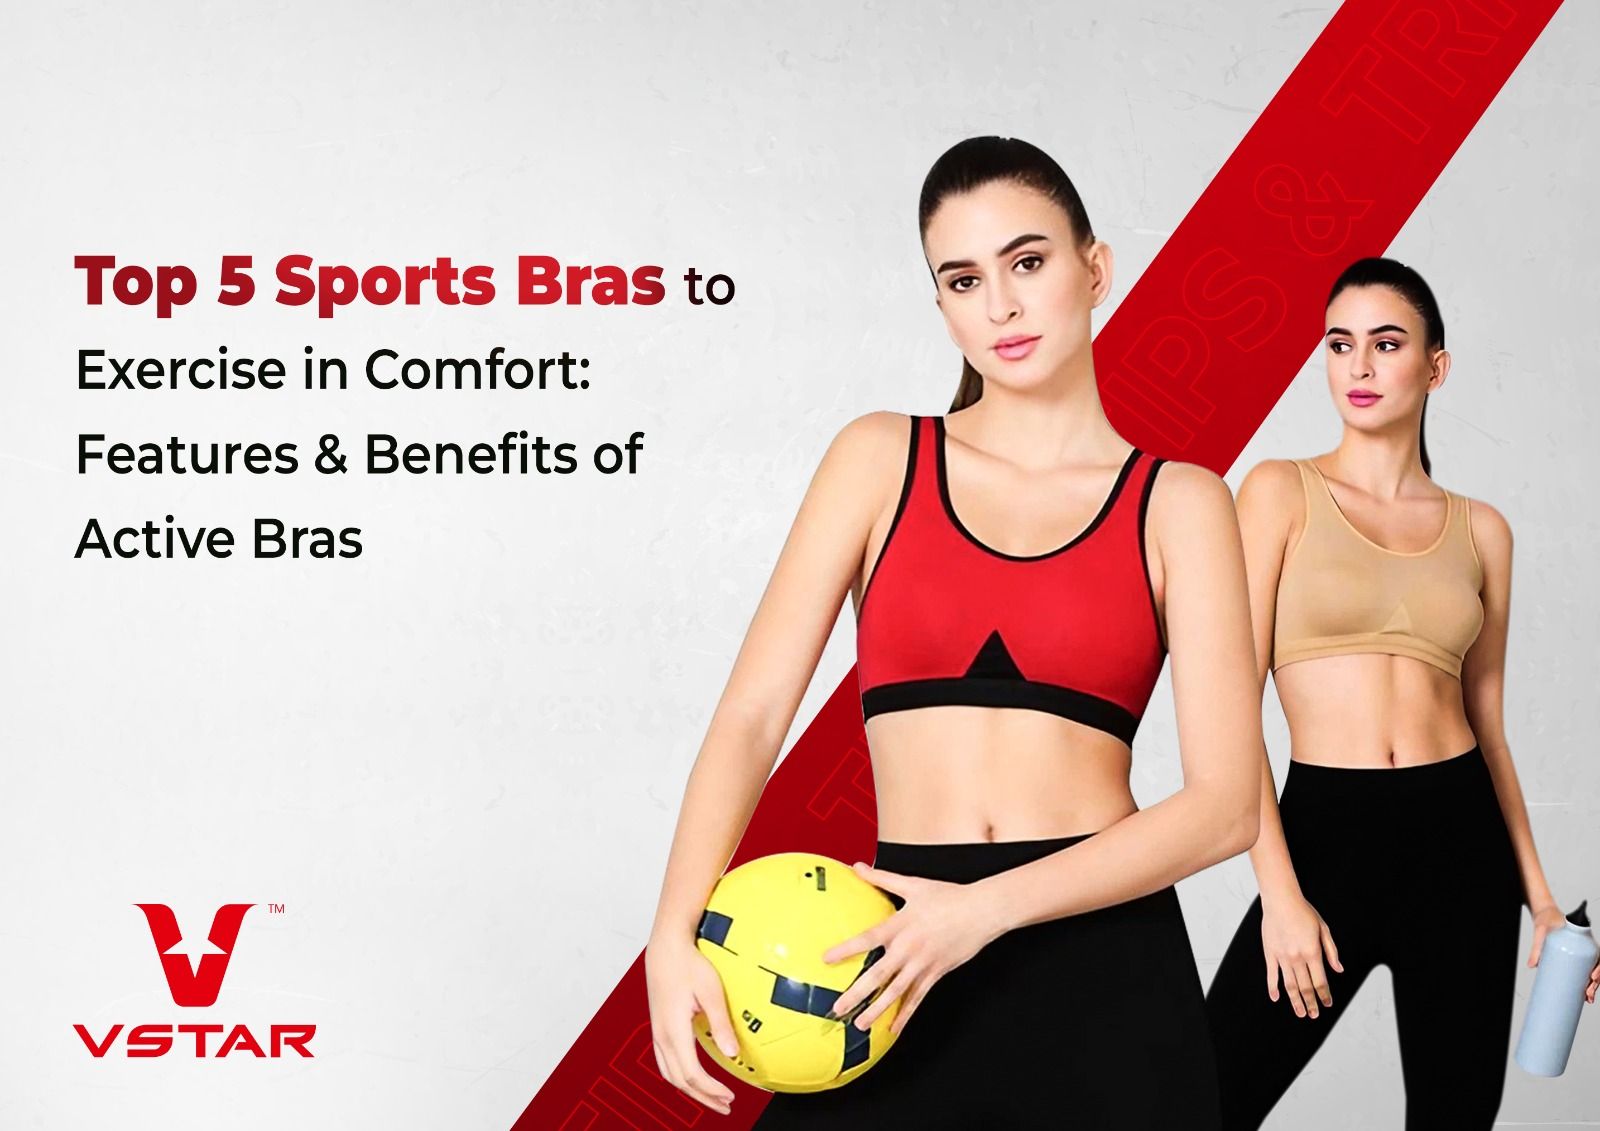 Top 5 Sports Bras to Exercise in Comfort: Features & Benefits of Active Bras